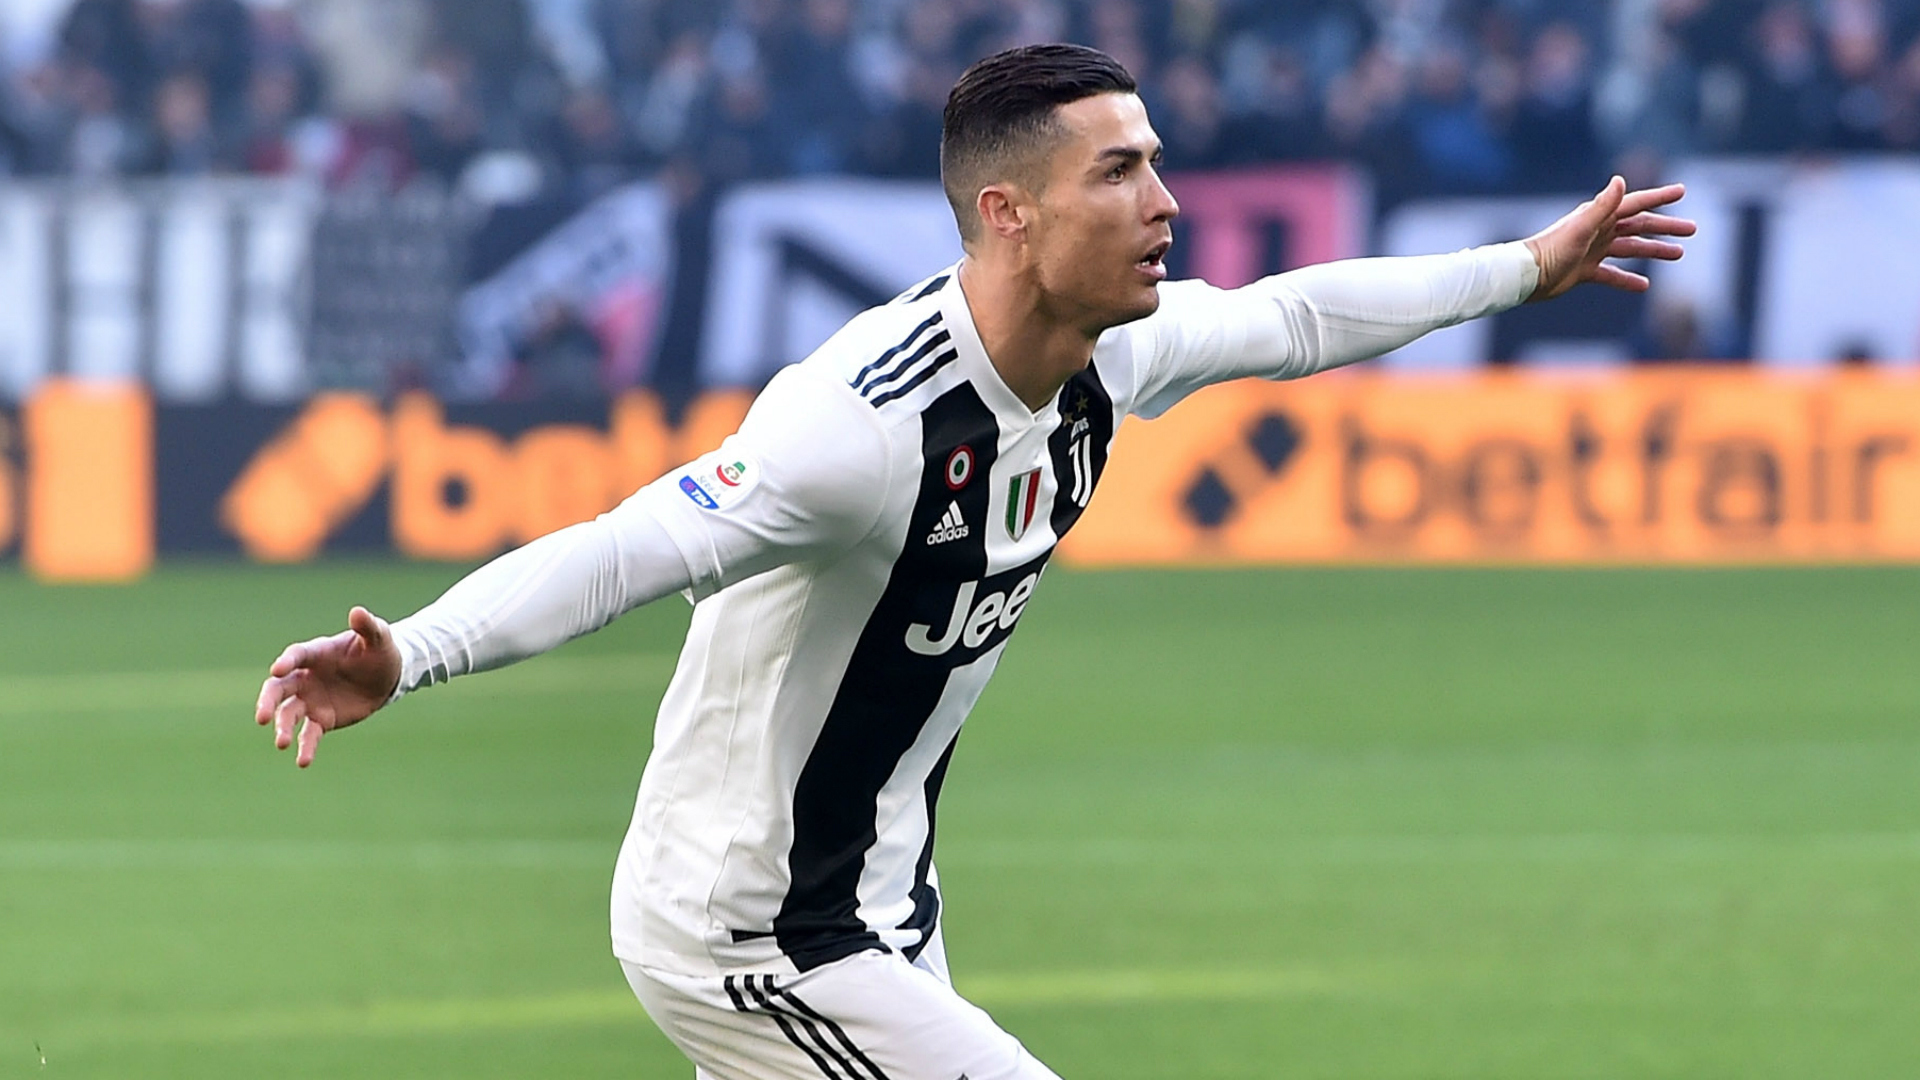 Ronaldo Double Sees Juventus Hang On For 2-1 VAR-Assisted Win Over Sampdoria